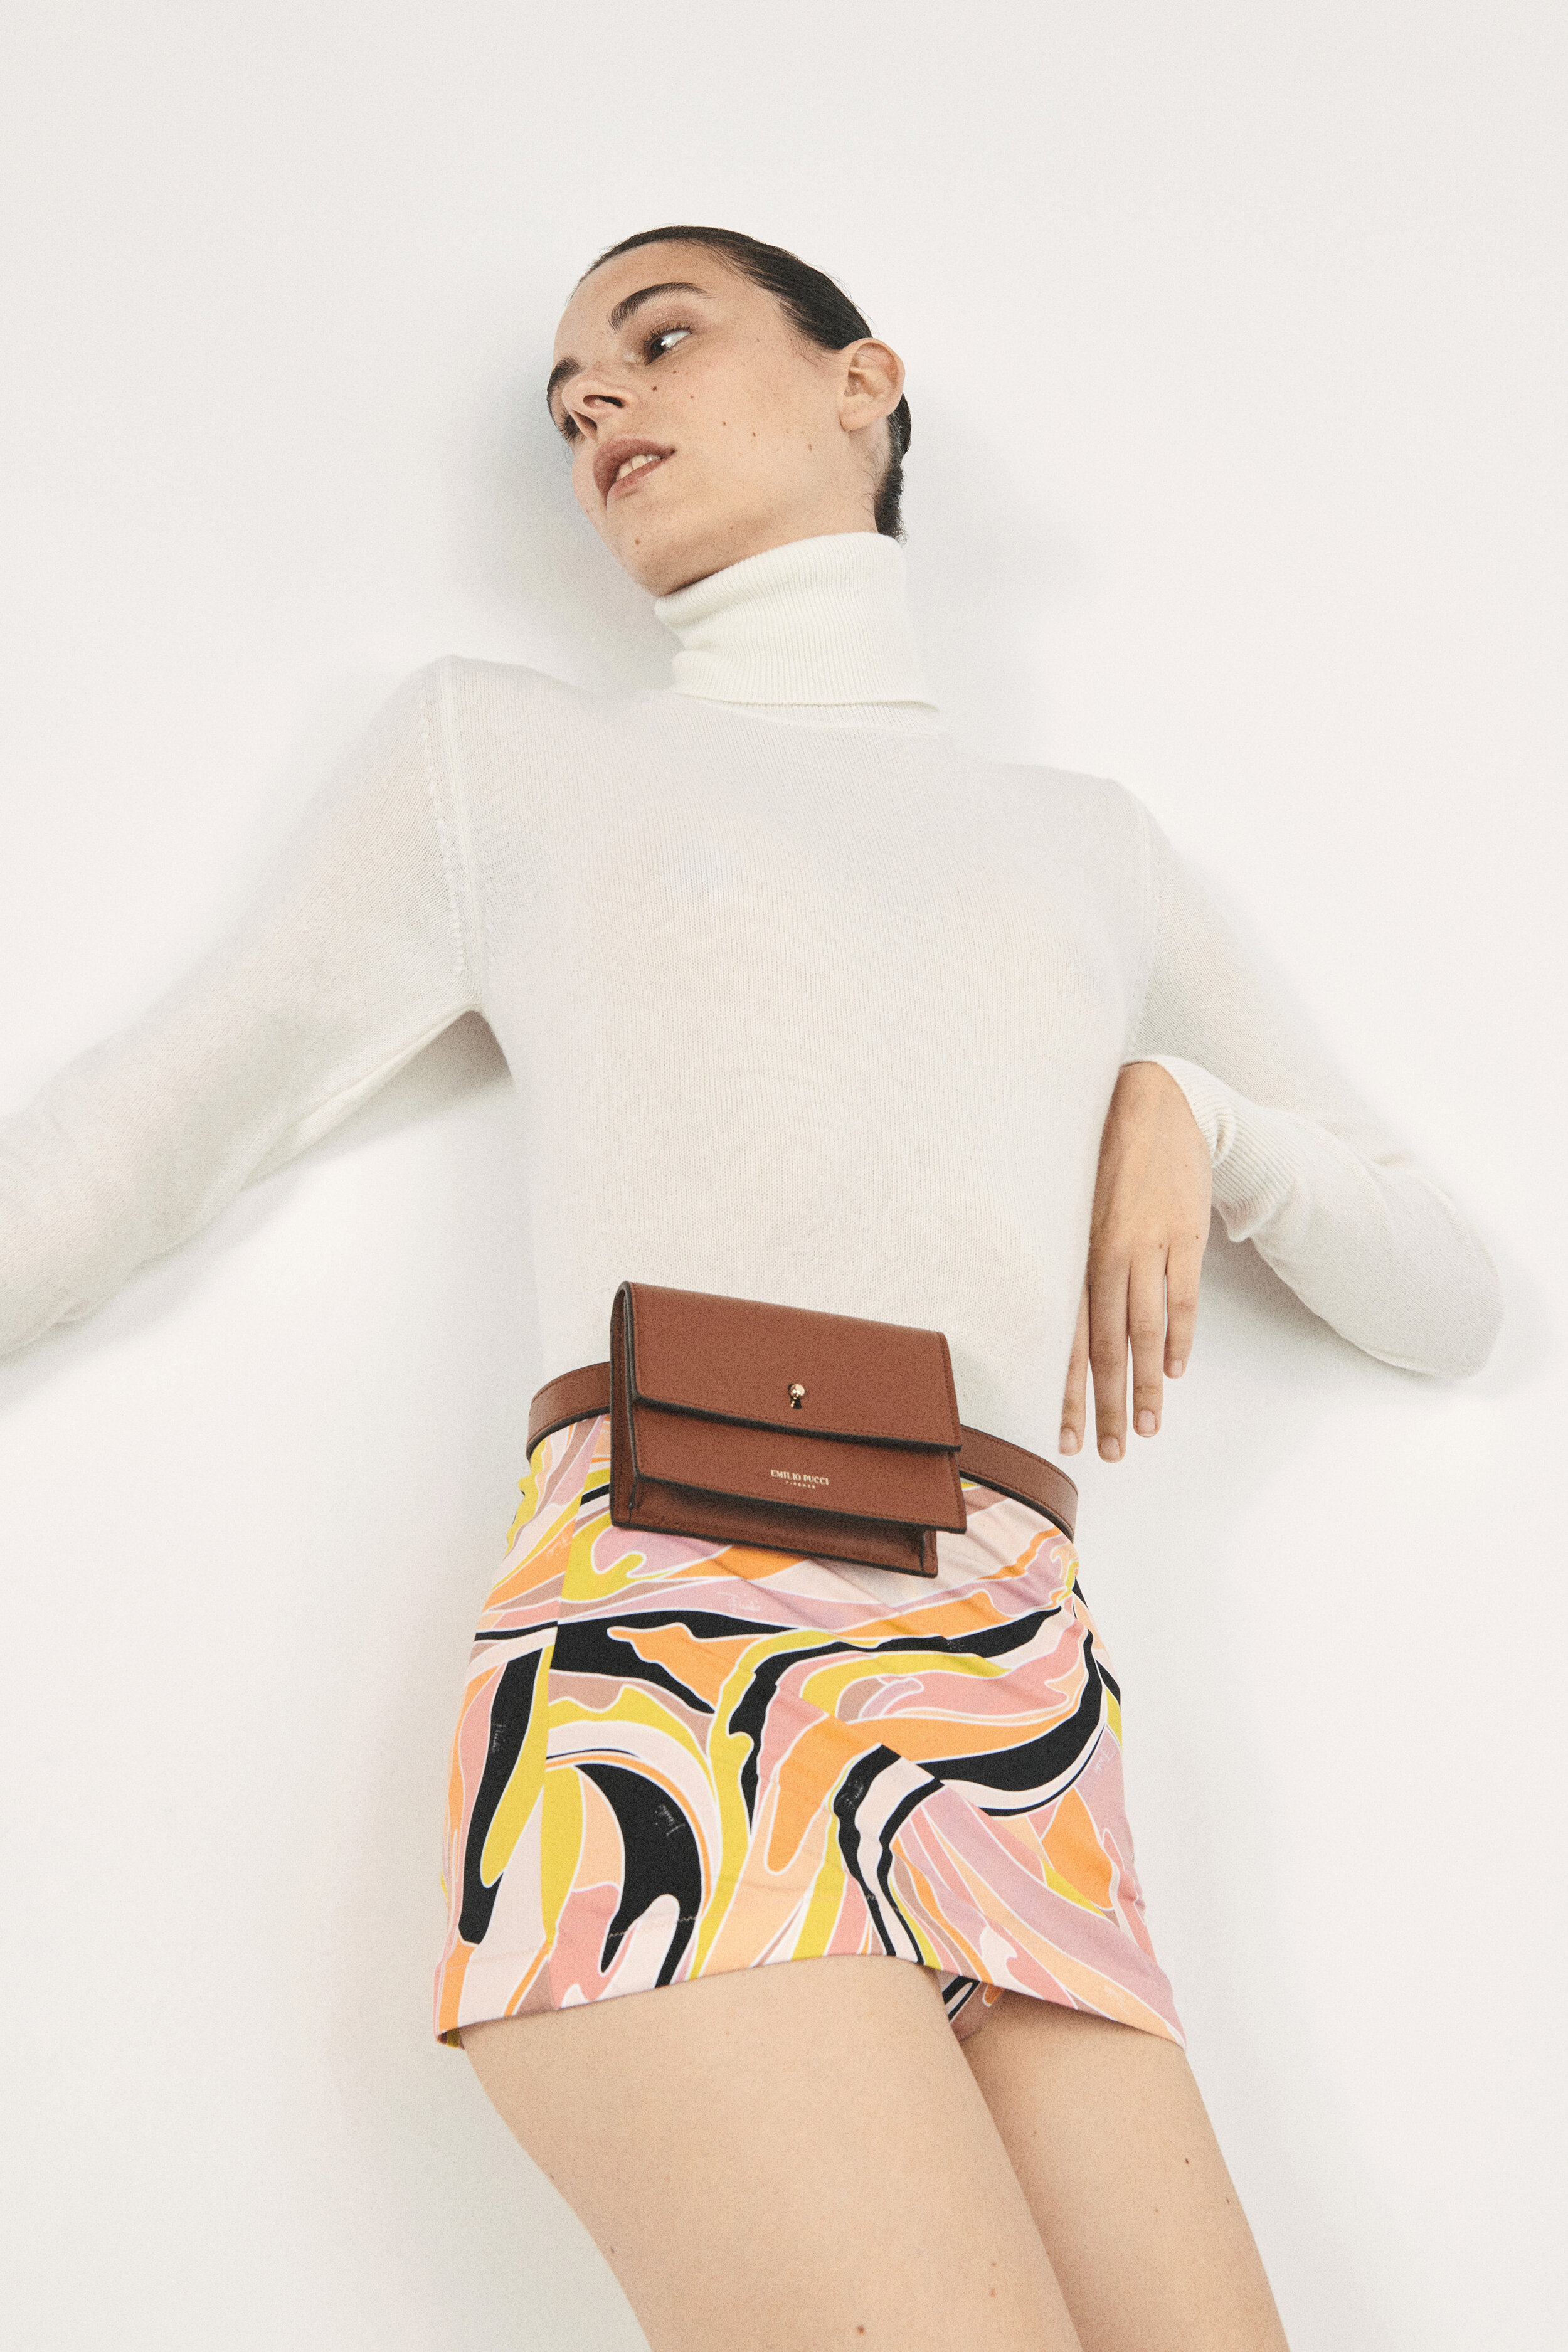 Emilio Pucci to Reboot as a Resort-focused Brand: Sources – WWD